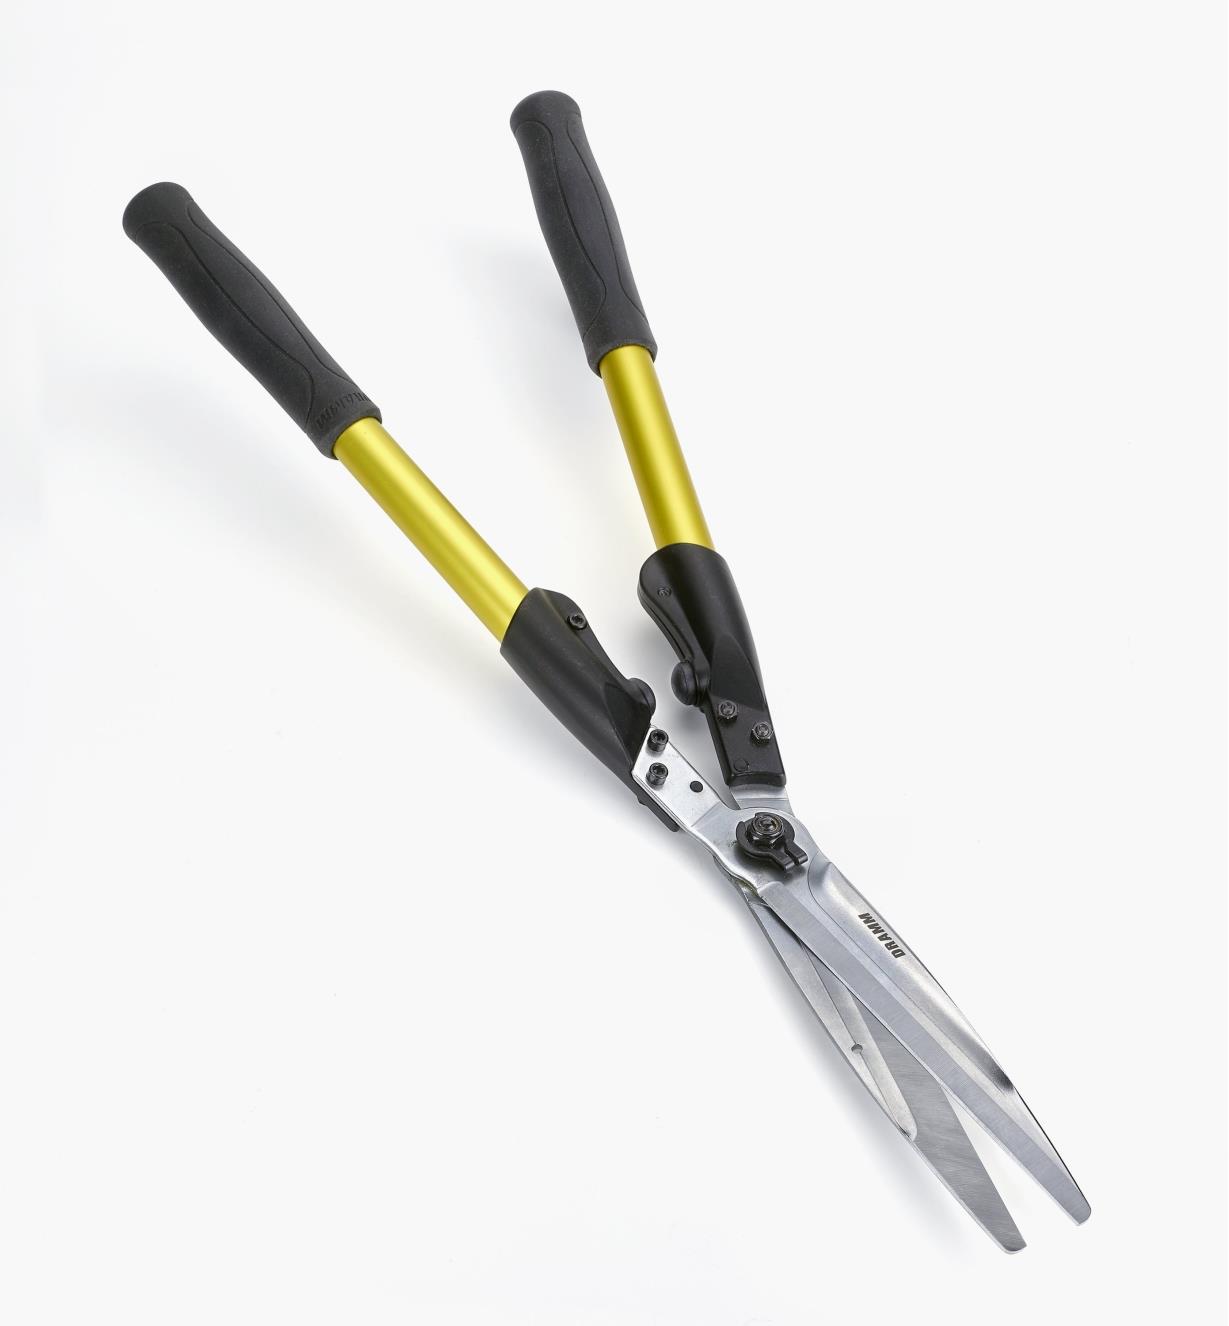 Precision Safety Scissors - Lee Valley Tools